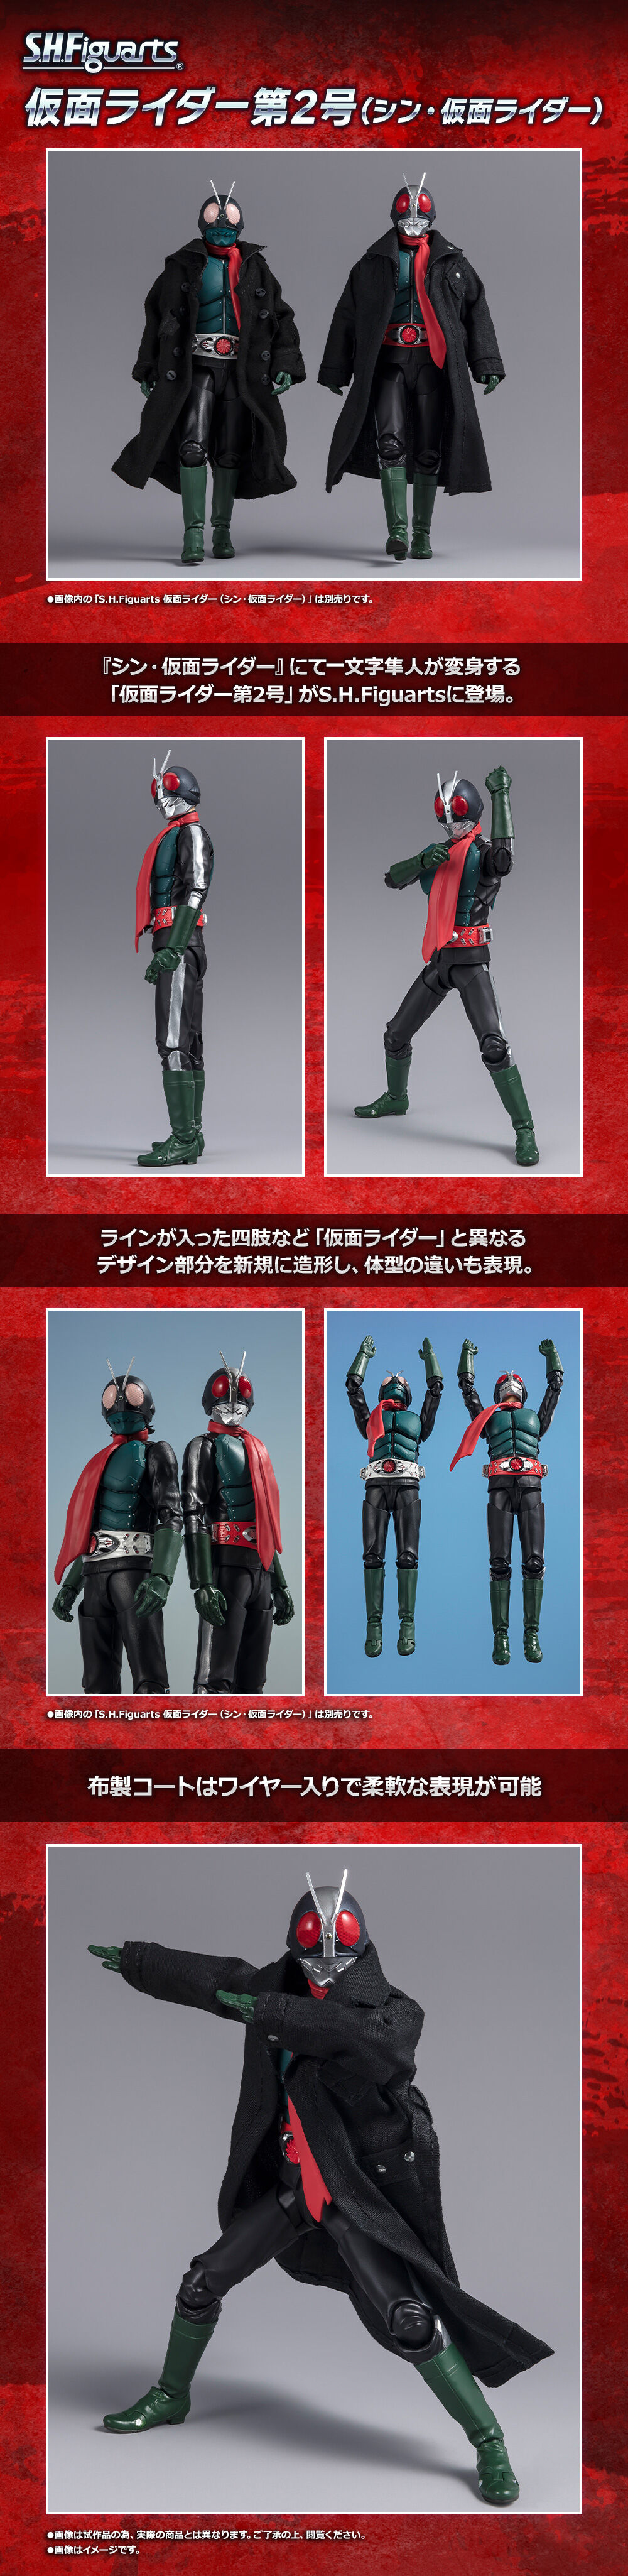 S.H.Figuarts シン・仮面ライダー 第2号